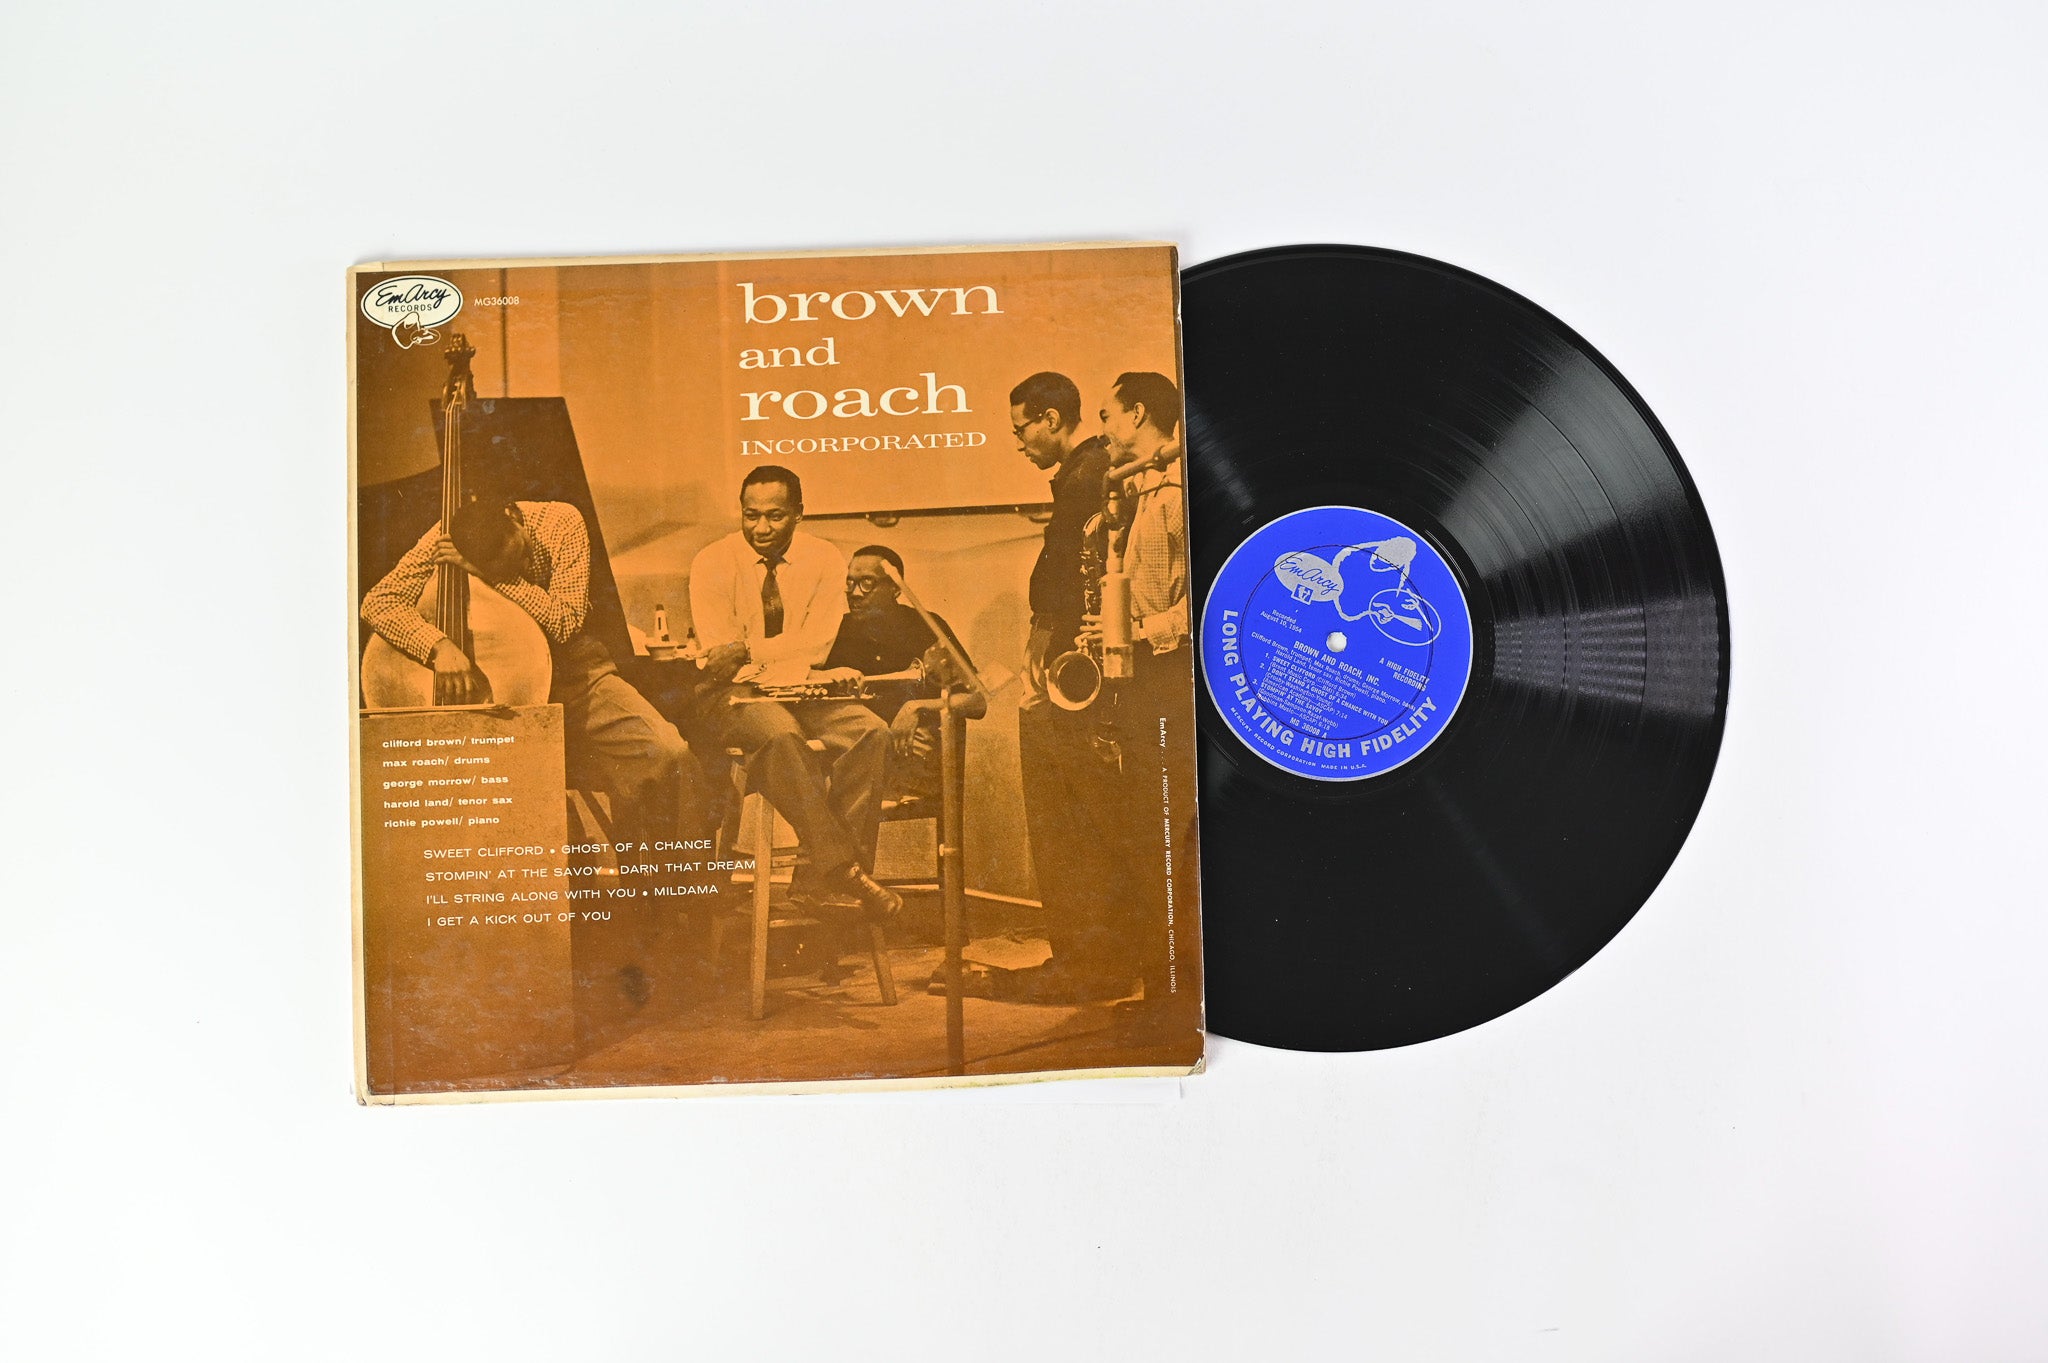 Clifford Brown And Max Roach - Brown And Roach Incorporated on Emarcy Mono Deep Groove Blue Back